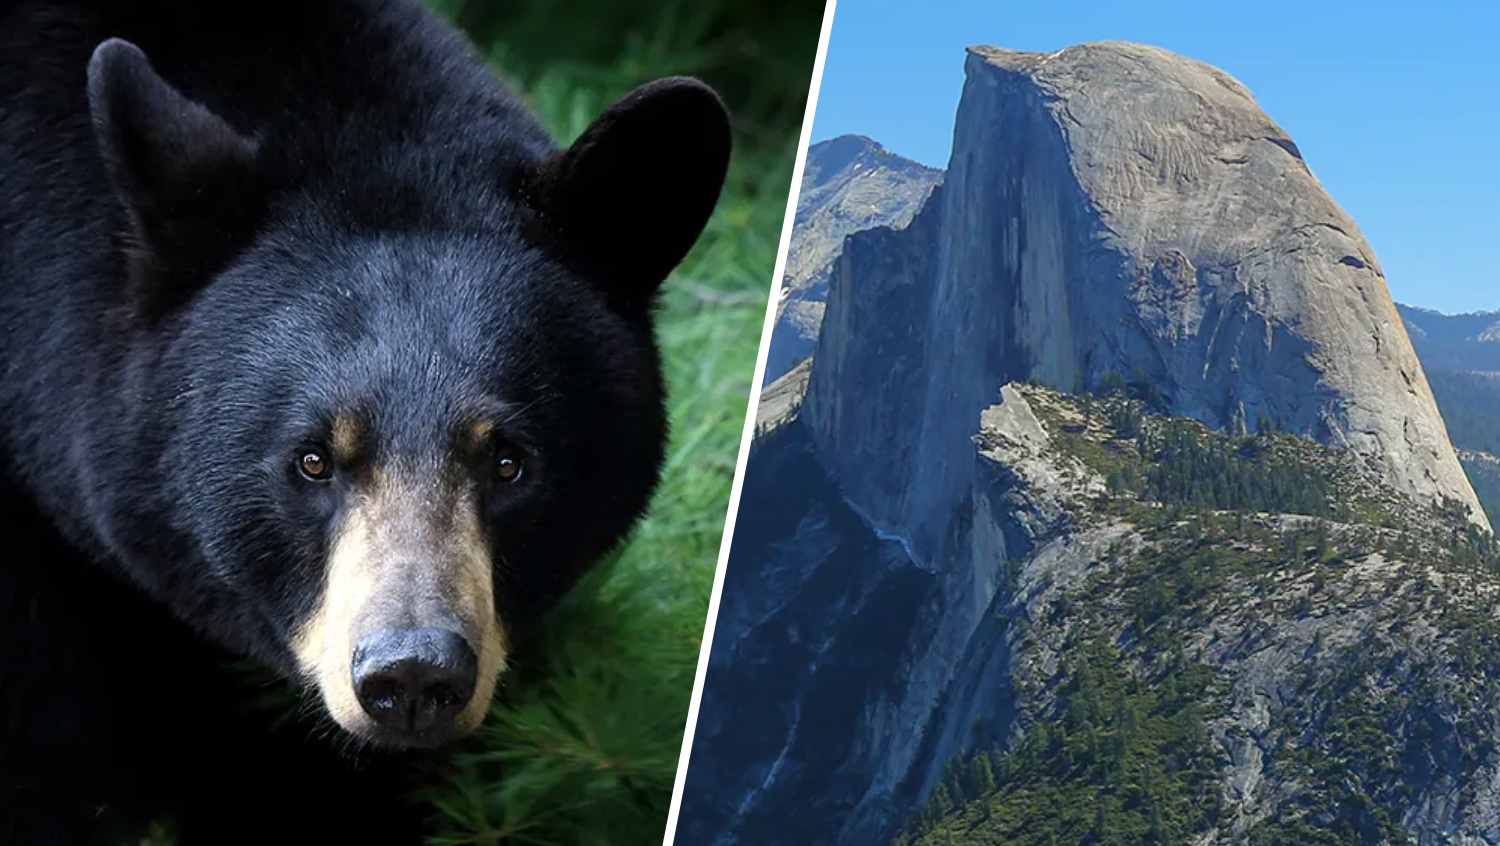 Recently discovered evidence points to bears climbing Yosemite's Half Dome  - ABC7 San Francisco